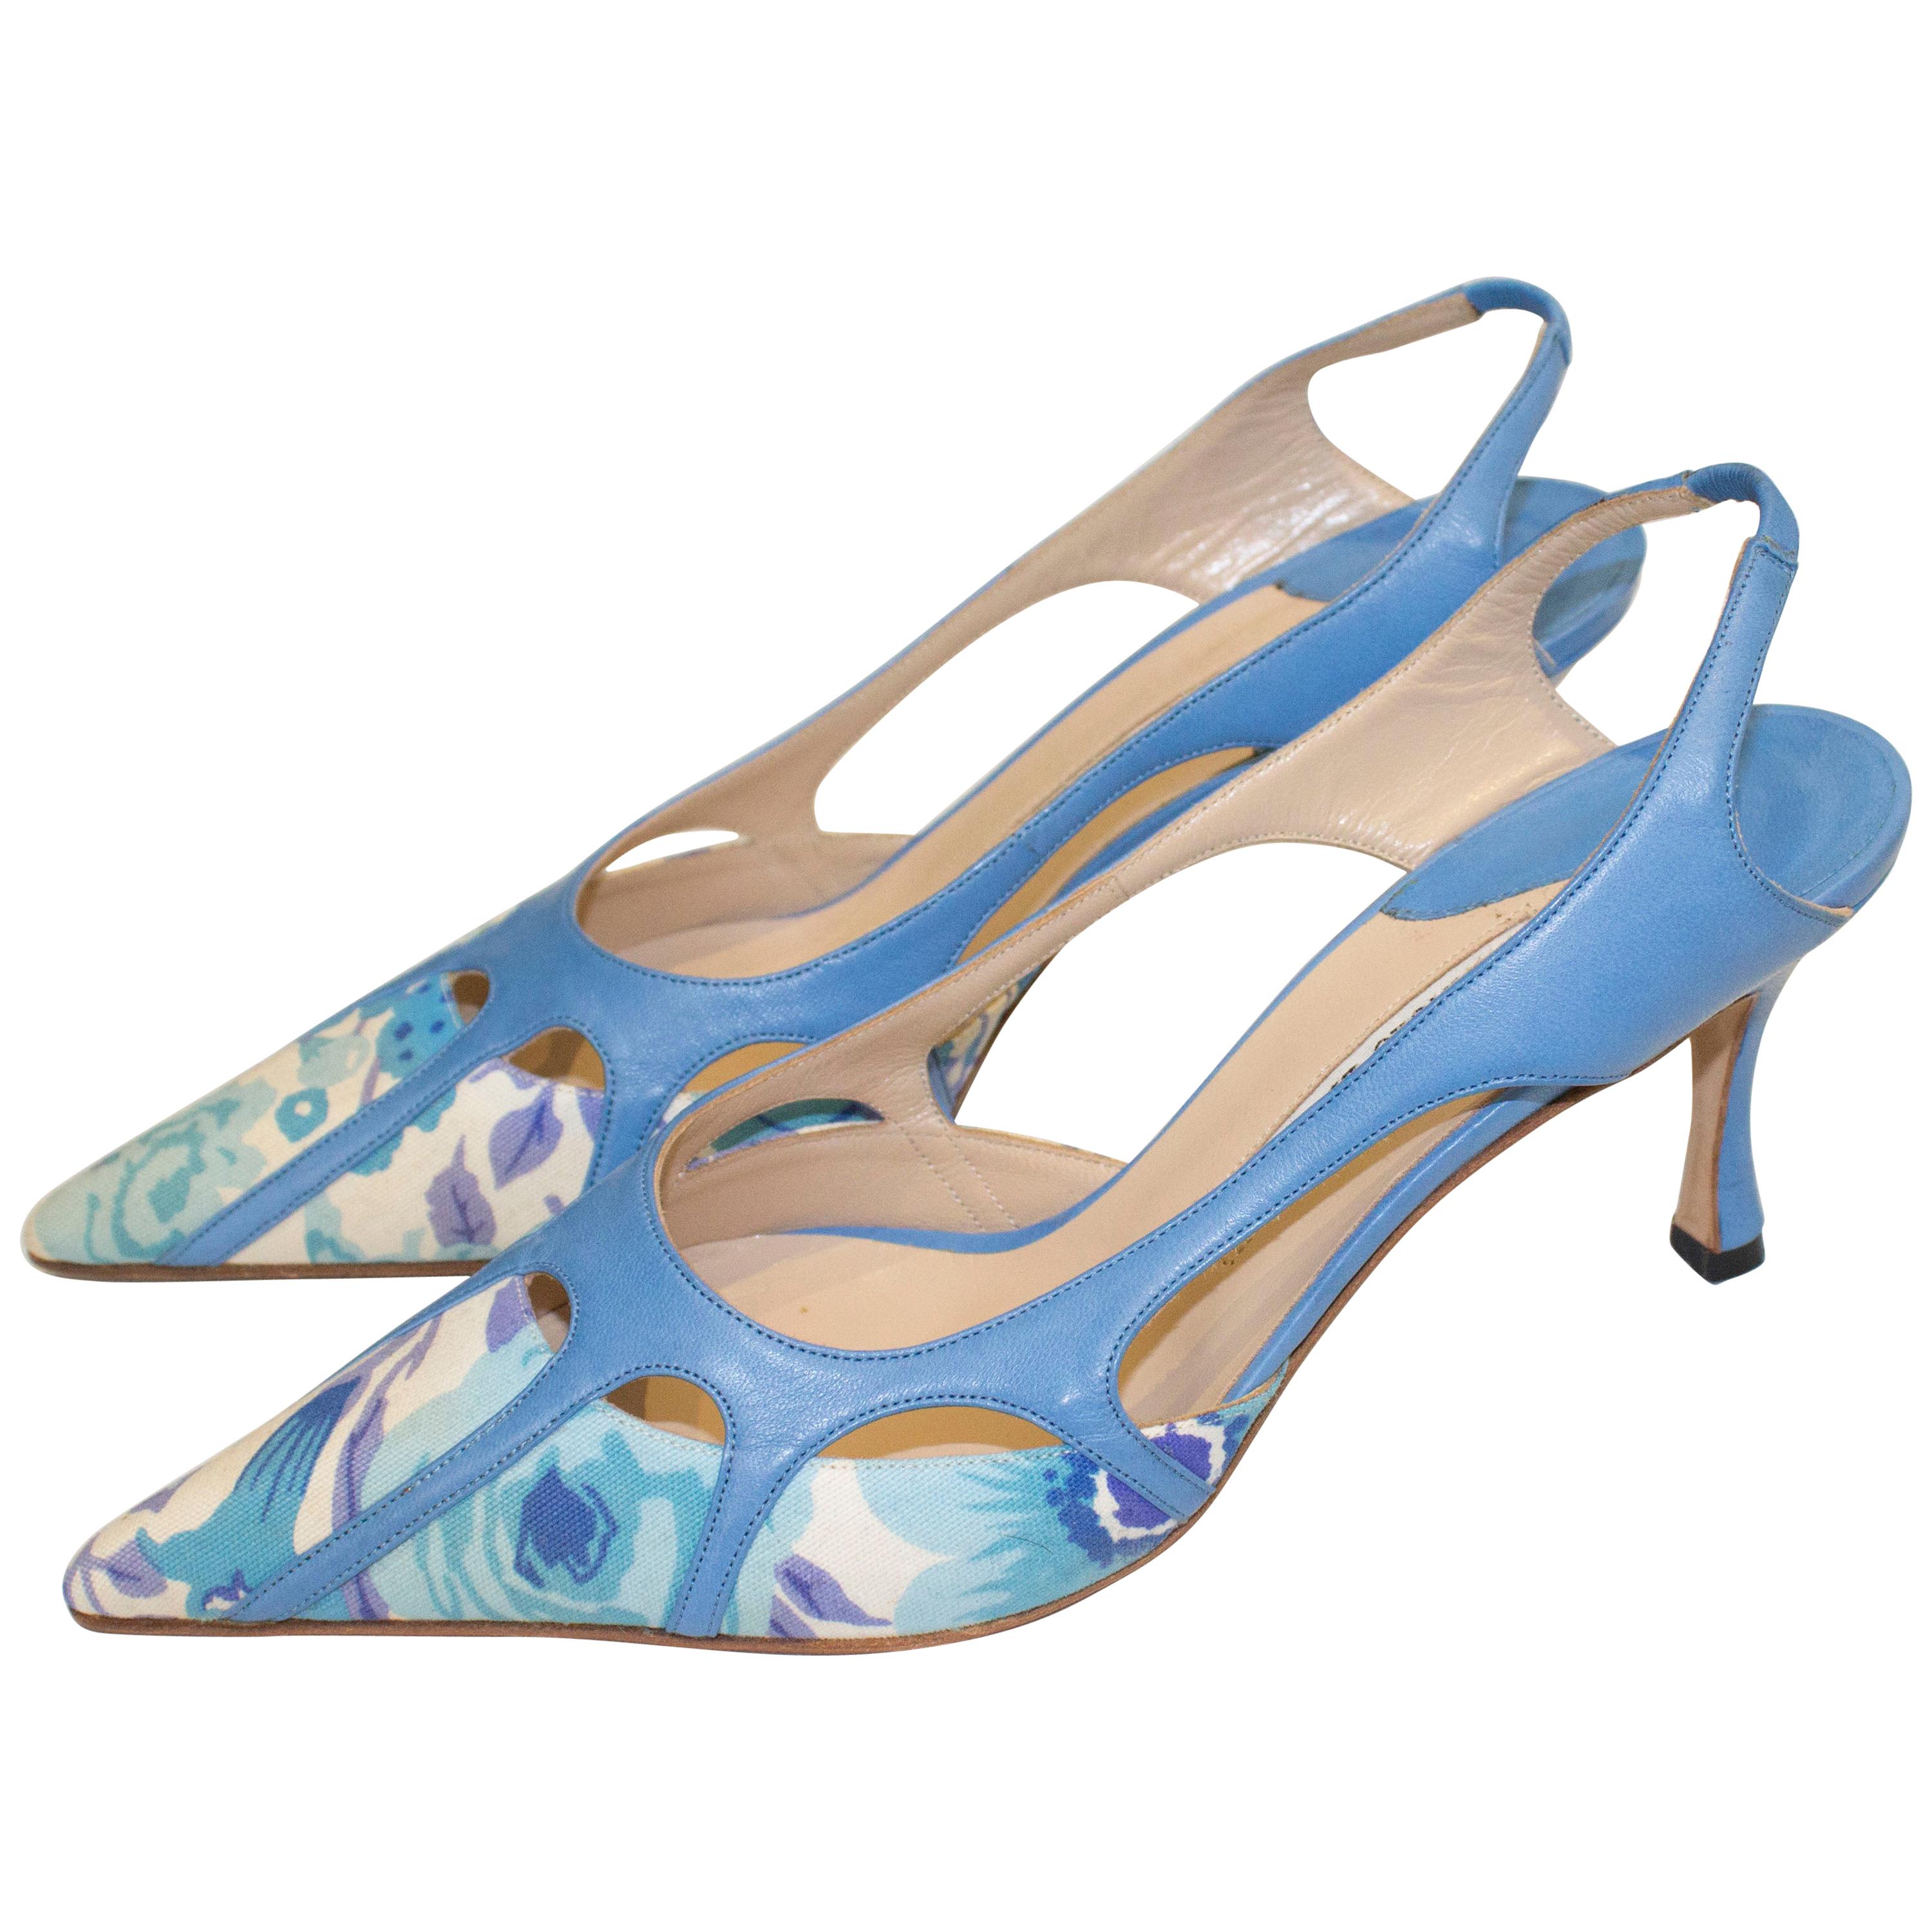 Manolo Blahnik Blue Leather and Fabric Sling Back Shoes